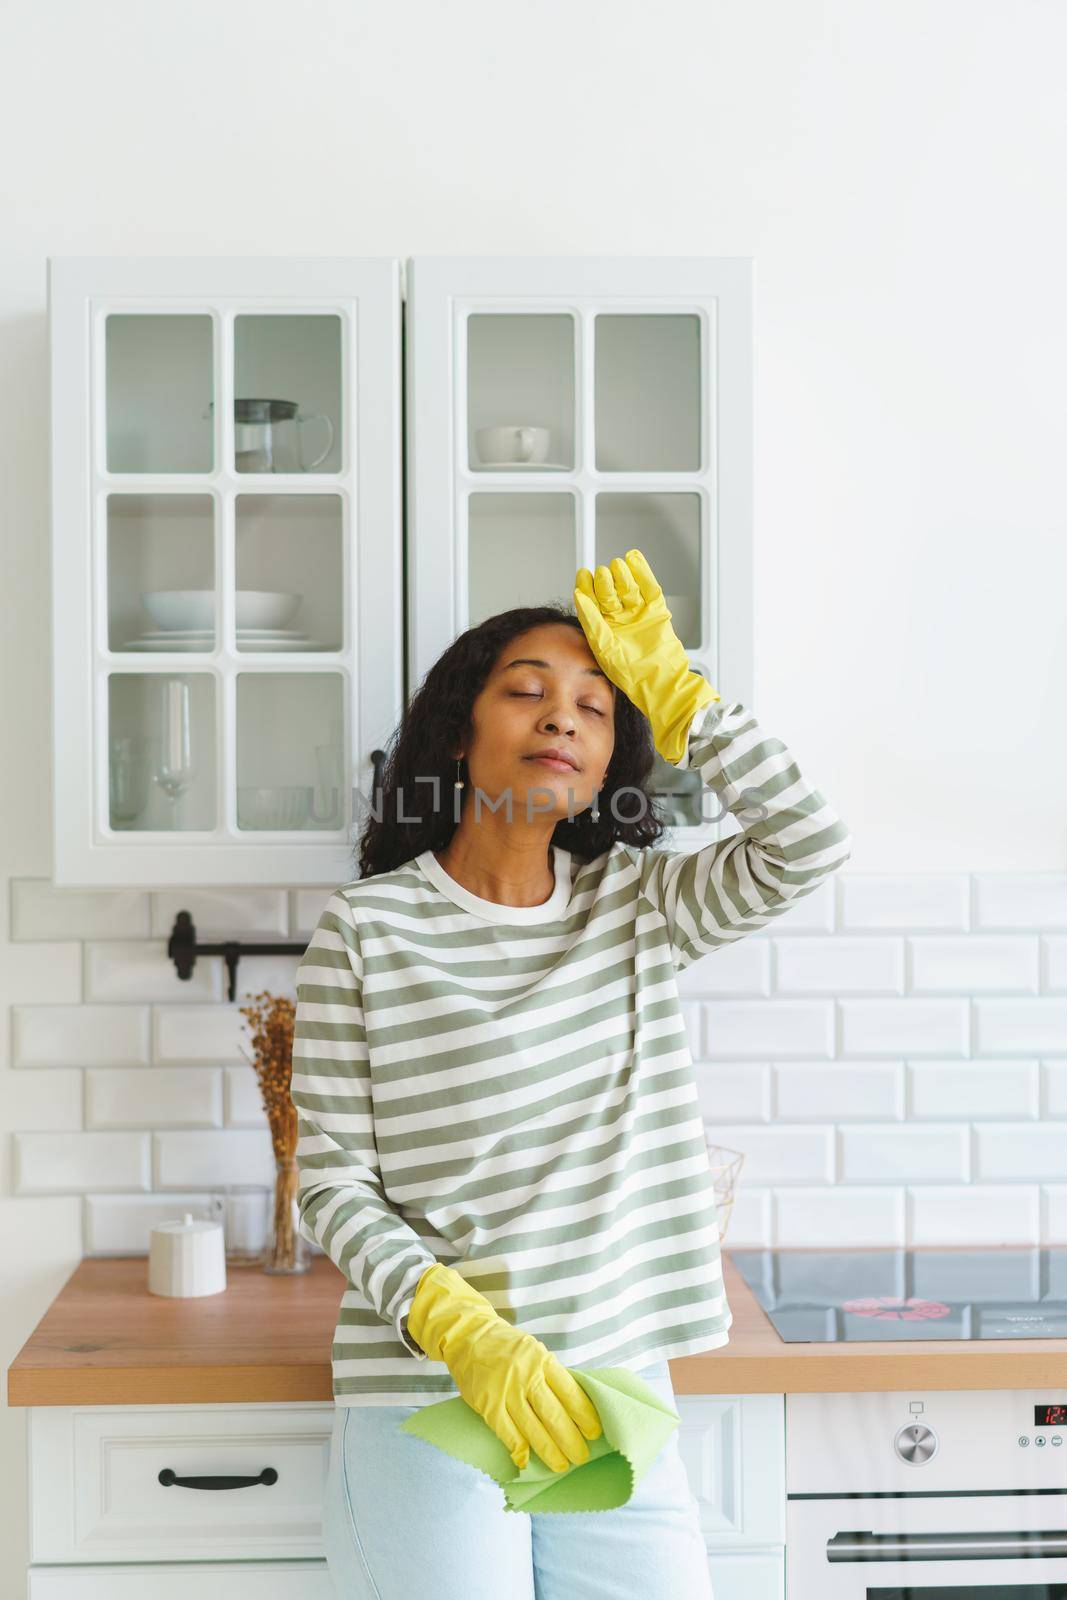 Concept of African-American woman wiping sweat from forehead after finishing doing household chores. Having rest after cleaning kitchen unit in rubber gloves with washcloth